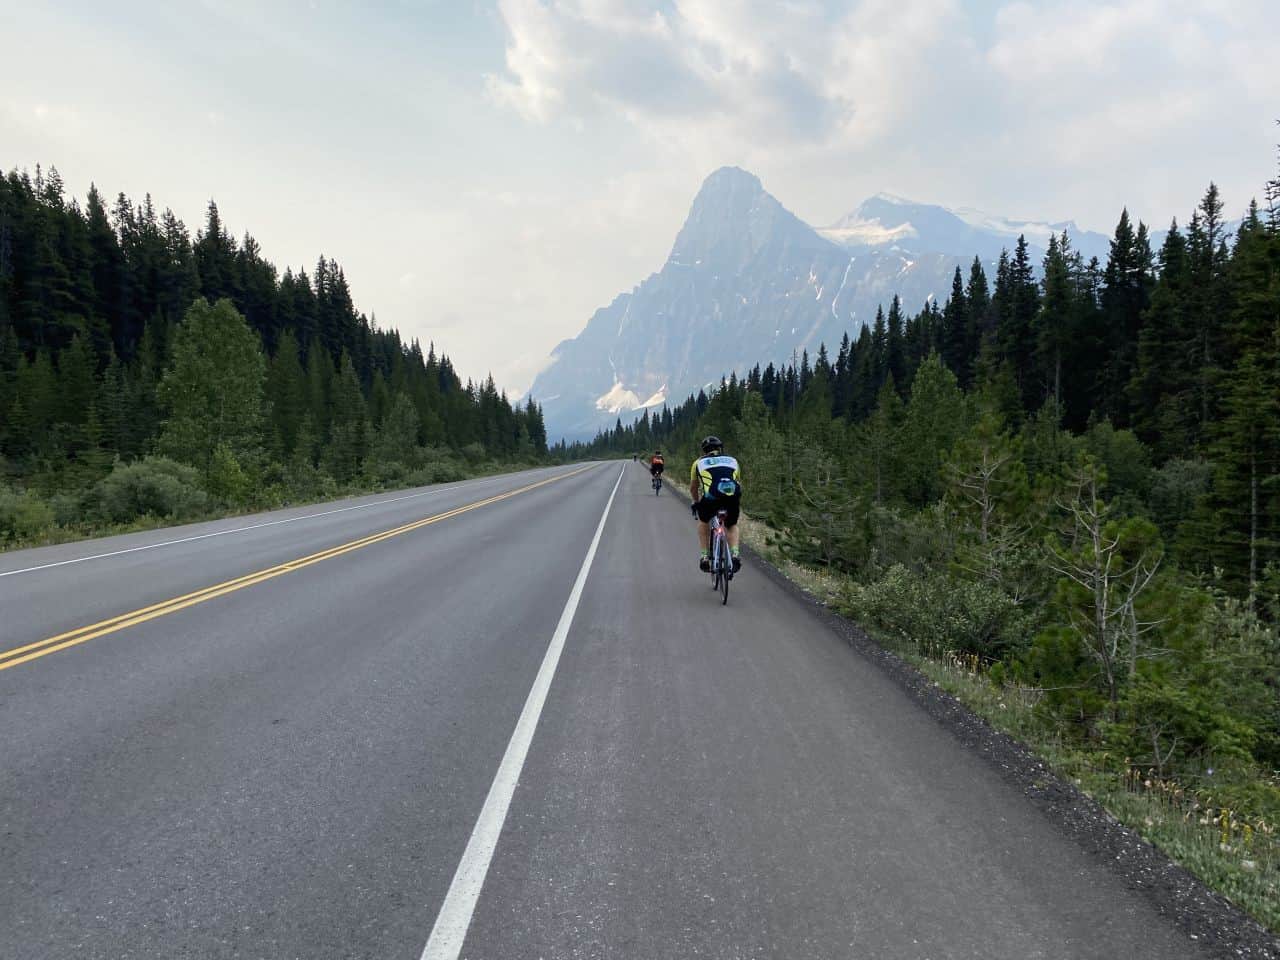 Cycling along the Icefields Parkway in Banff National Park, Alberta, Canada is an epic Canadian Rocky Mountain bike riding adventure.